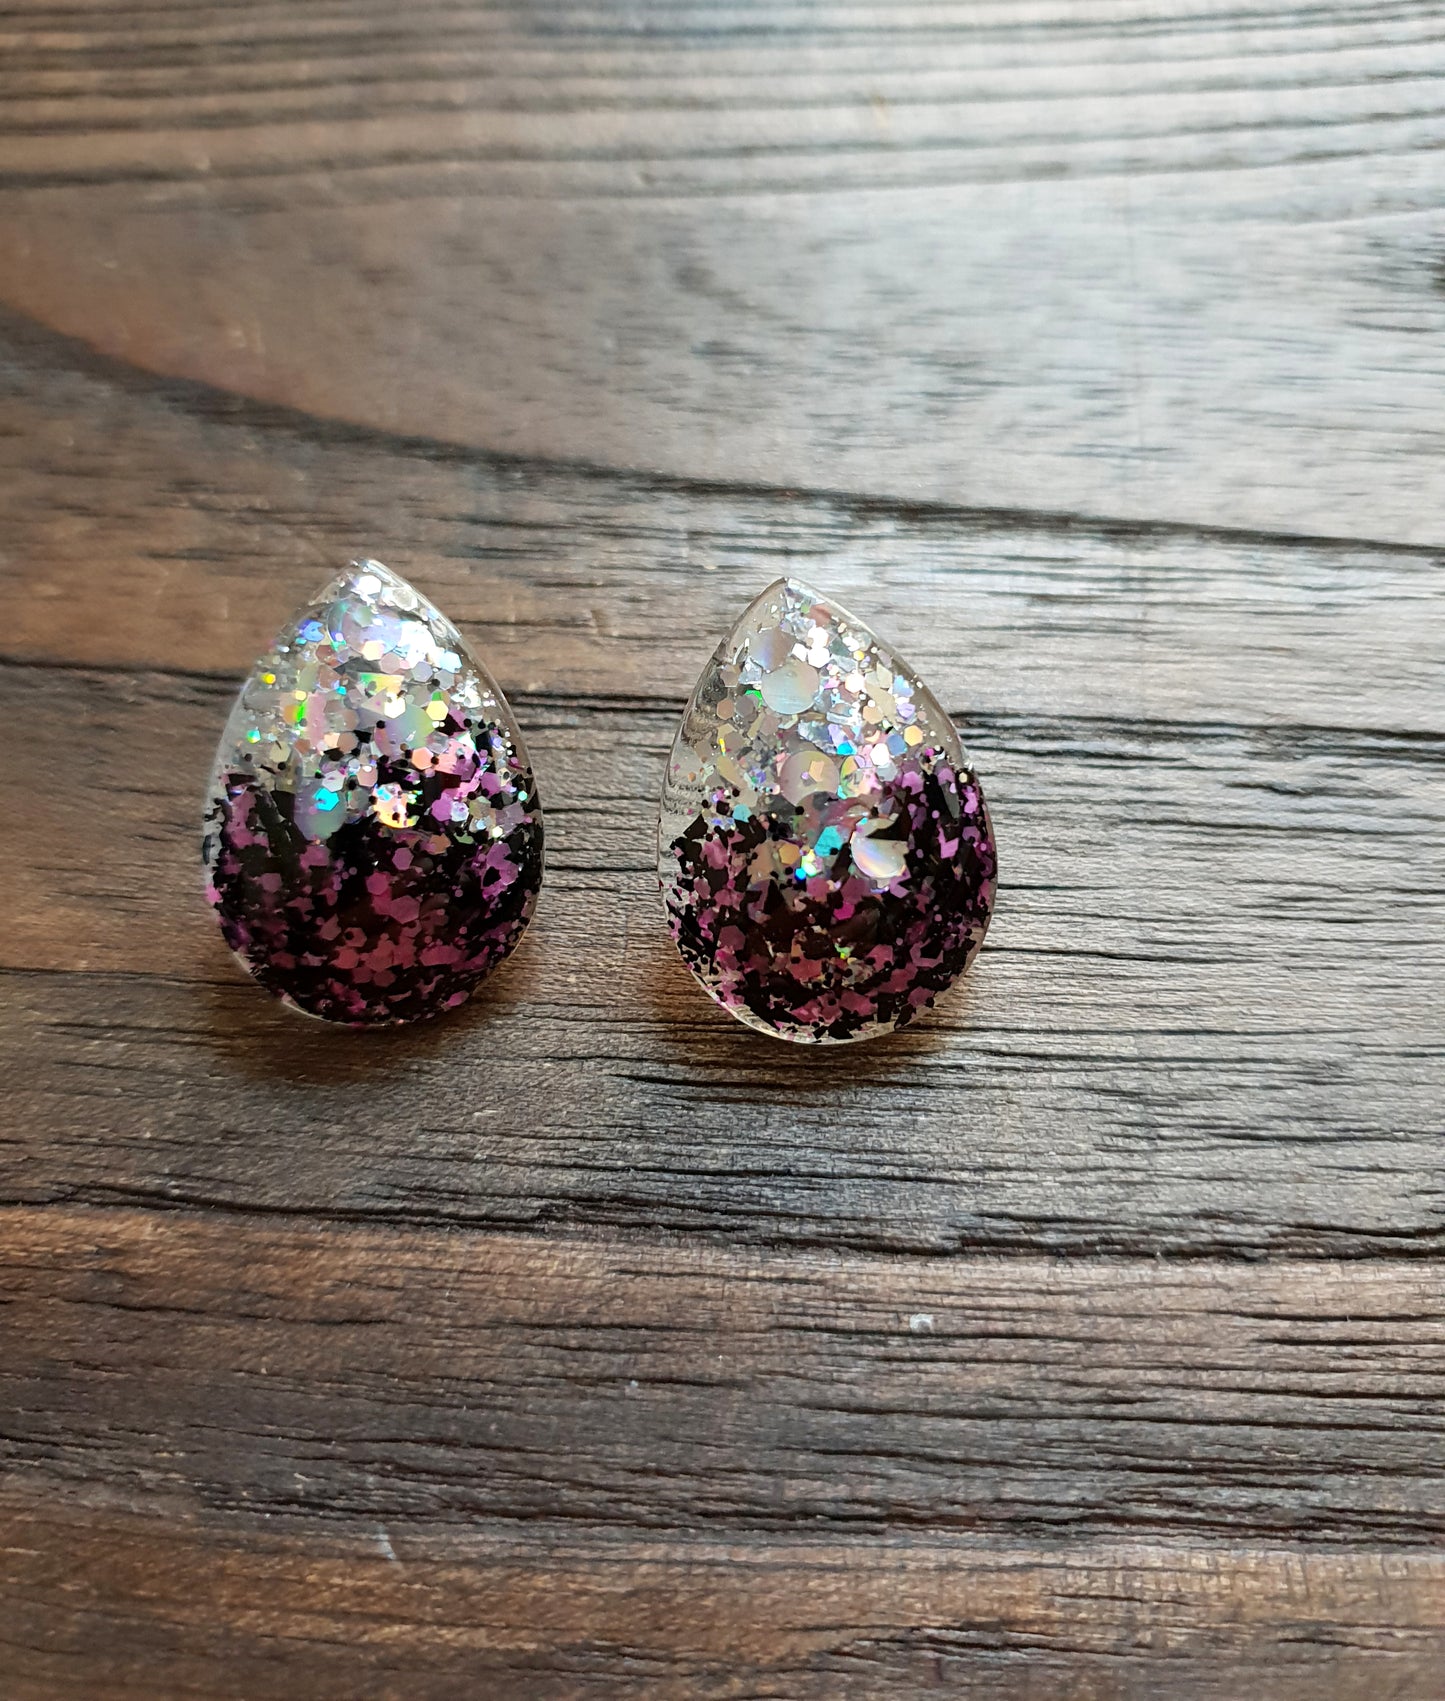 Teardrops Stud Glitter Earrings, Pink Black Silver Holographic Mix Earrings Stainless Steel - Silver and Resin Designs